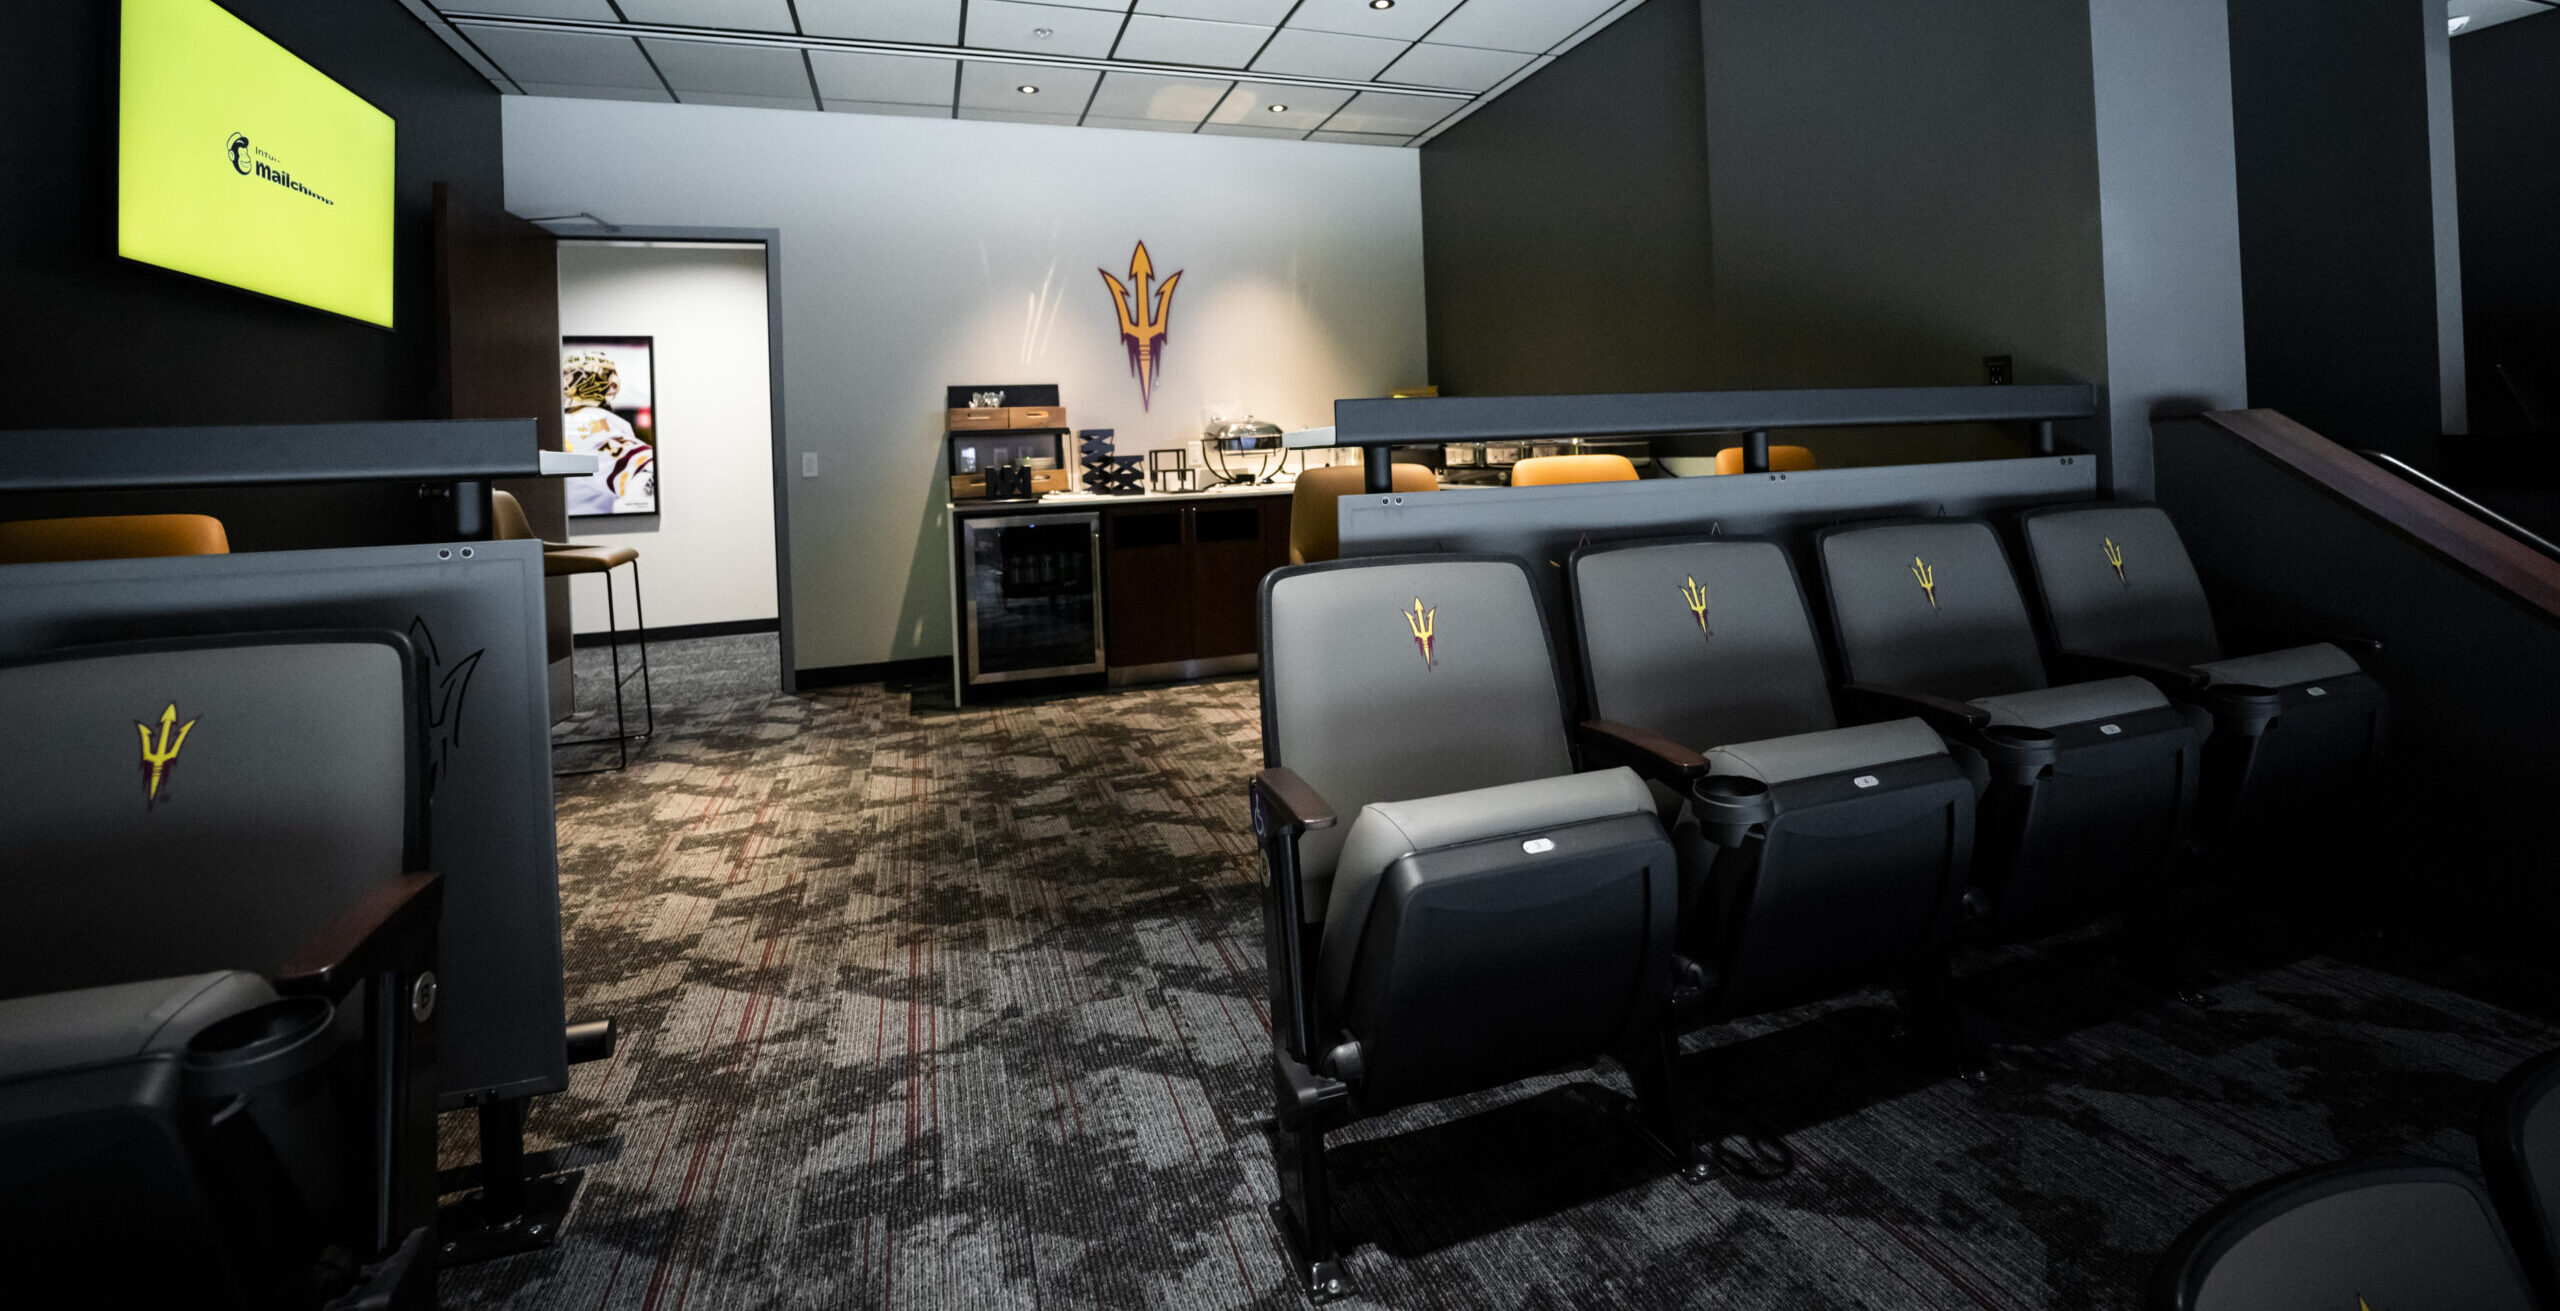 Luxury Suite, Loge Boxes, Premium Clubs For Events and Devils Hockey